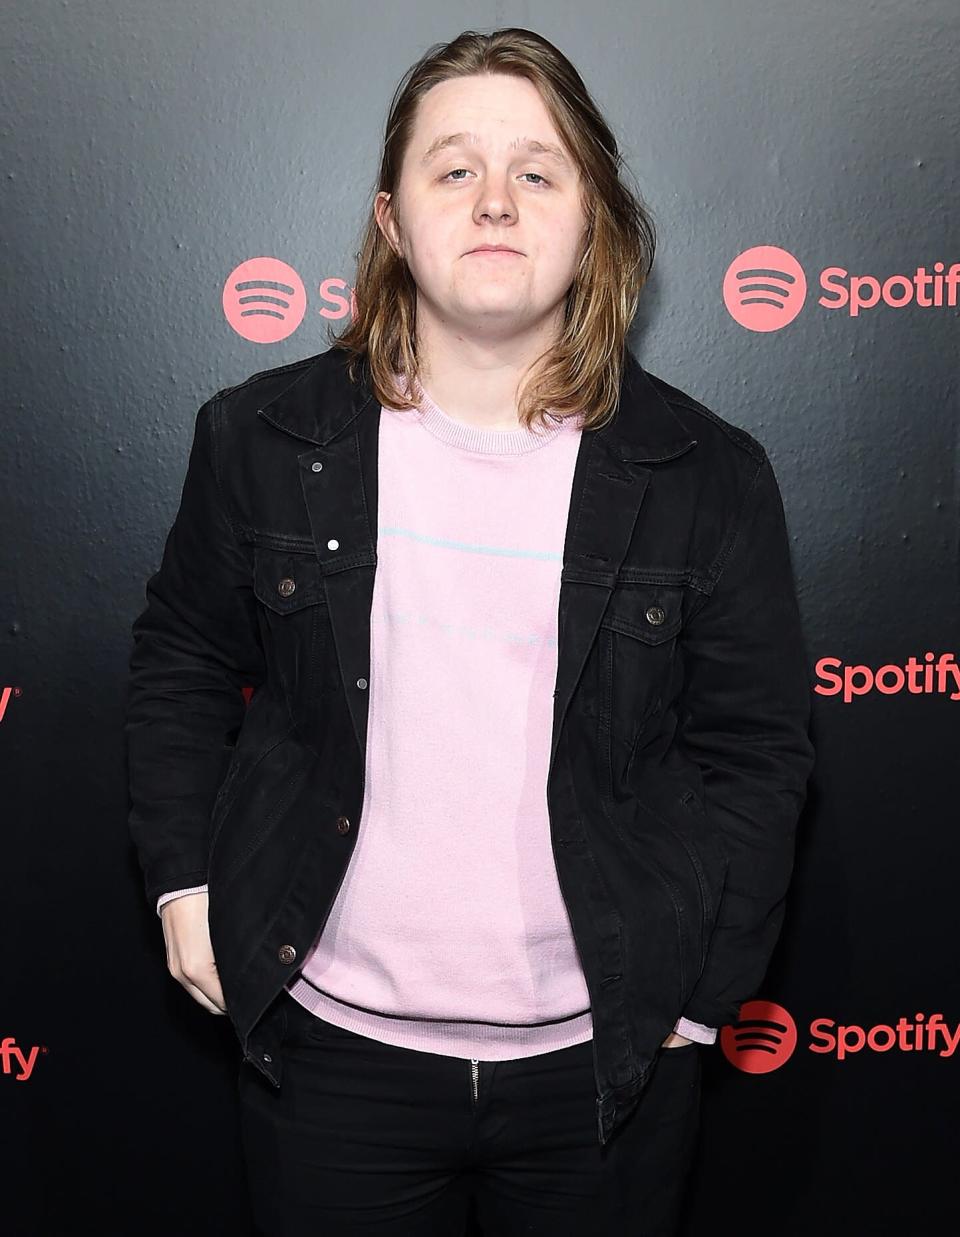 Spotify's Best New Artist Party featuring Lil Uzi Vert, SZA, Khalid, Alessia Cara and Julia Michaels held at Skylight Clarkson